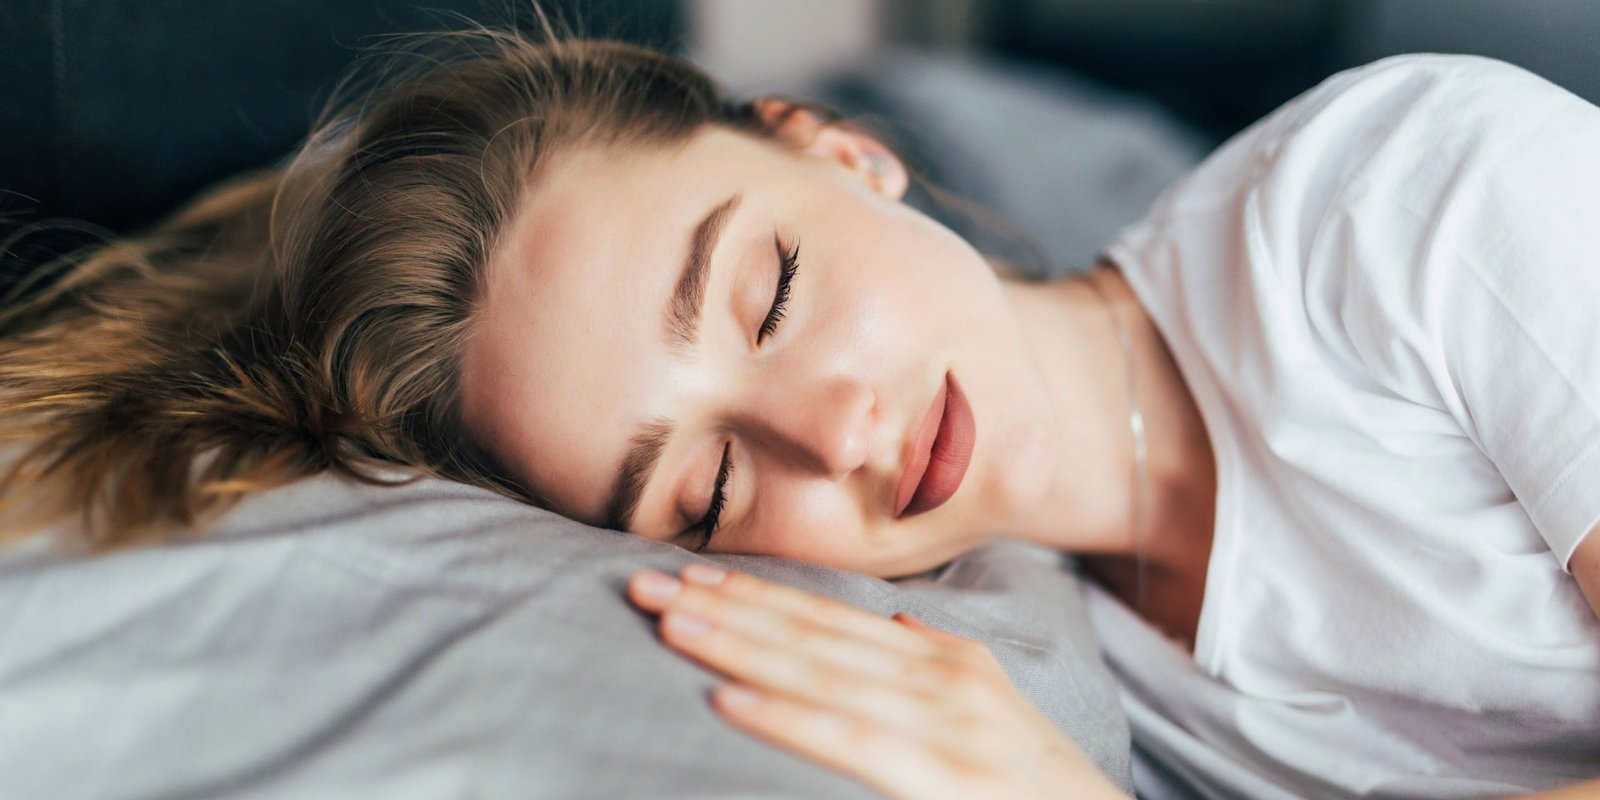 The most common causes of trouble falling asleep